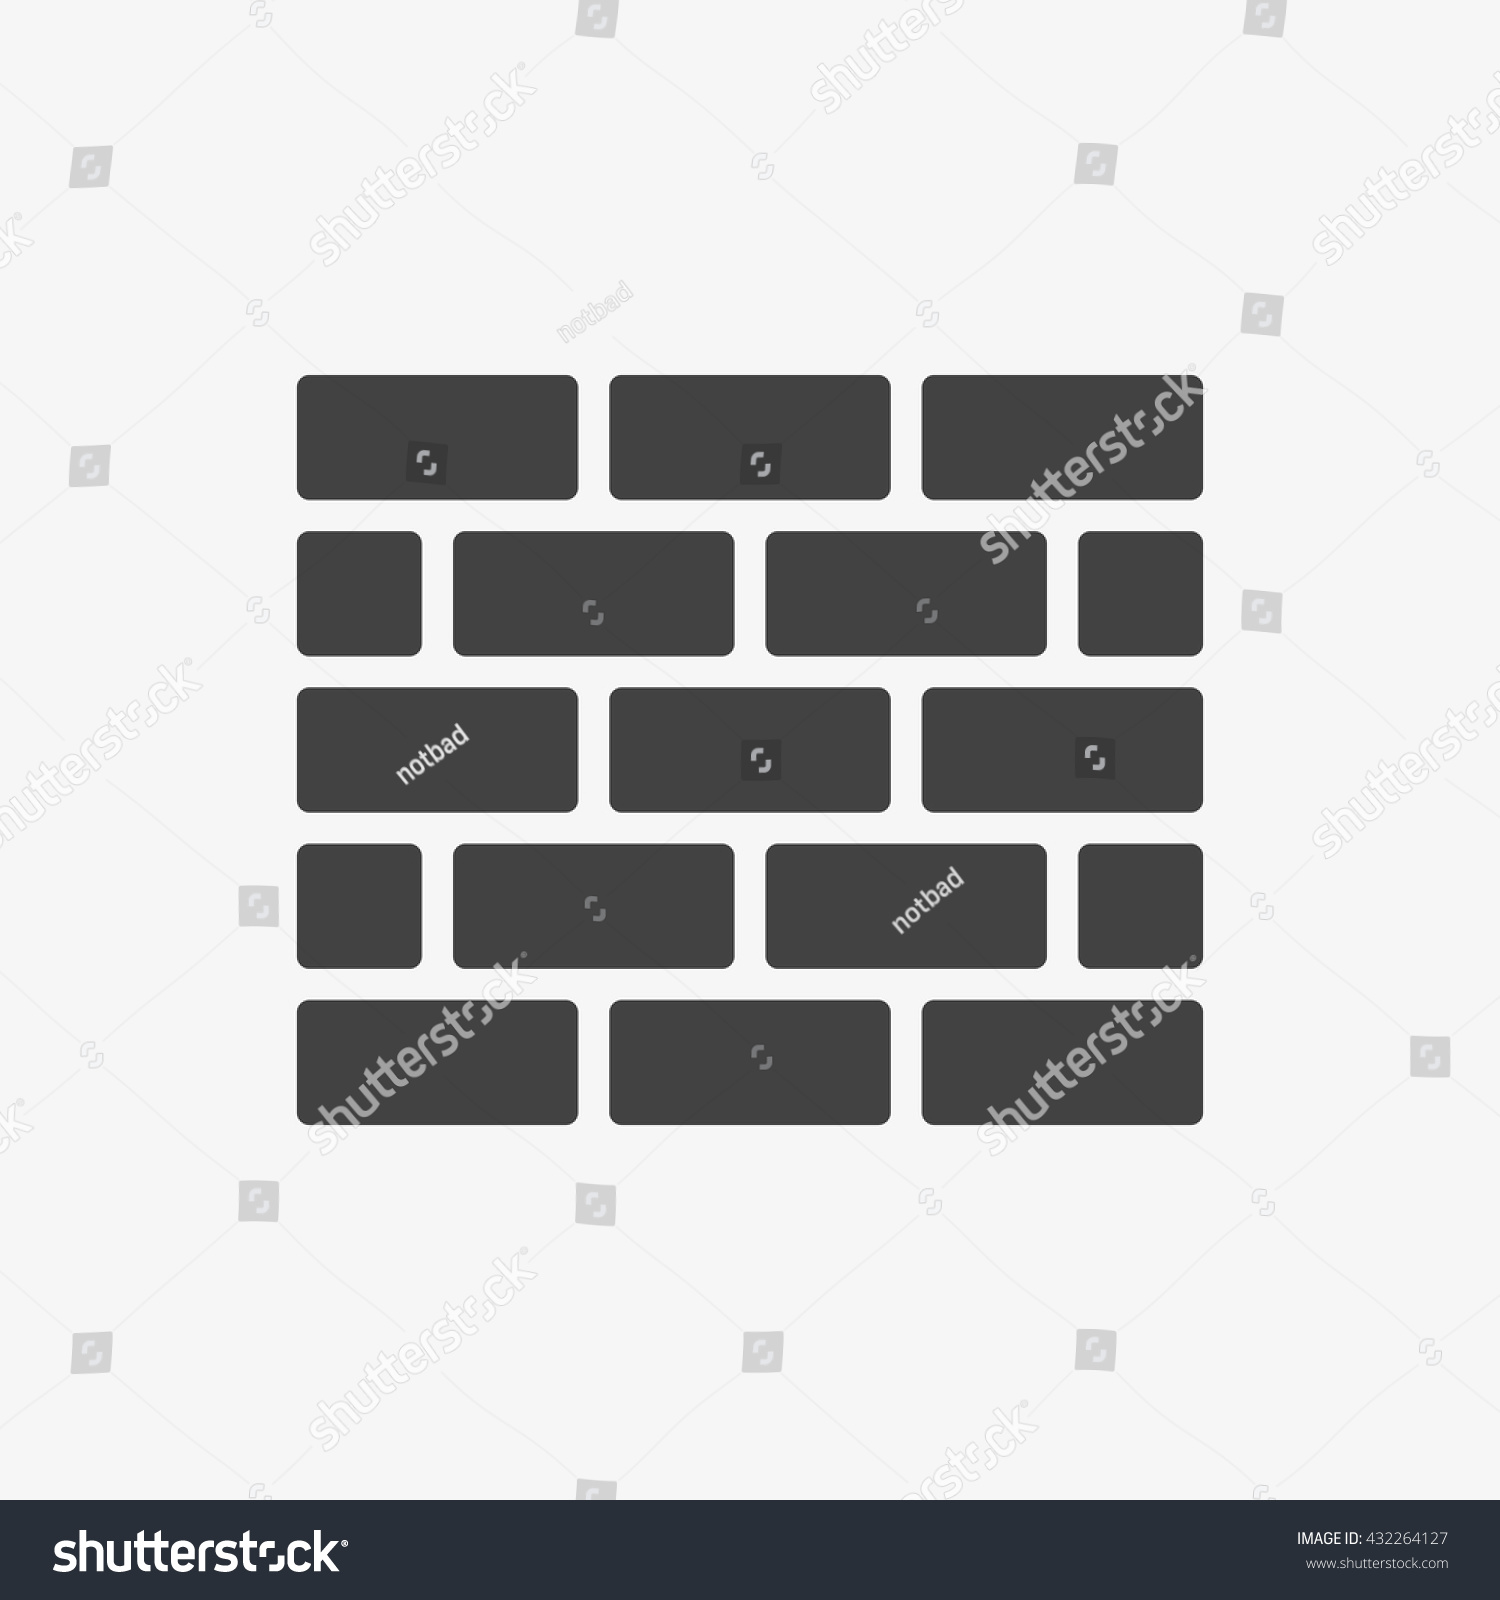 SVG of Wall Icon in trendy flat style isolated on grey background. Wall brick symbol for your web site design, logo, app, UI. Vector illustration, EPS10. svg